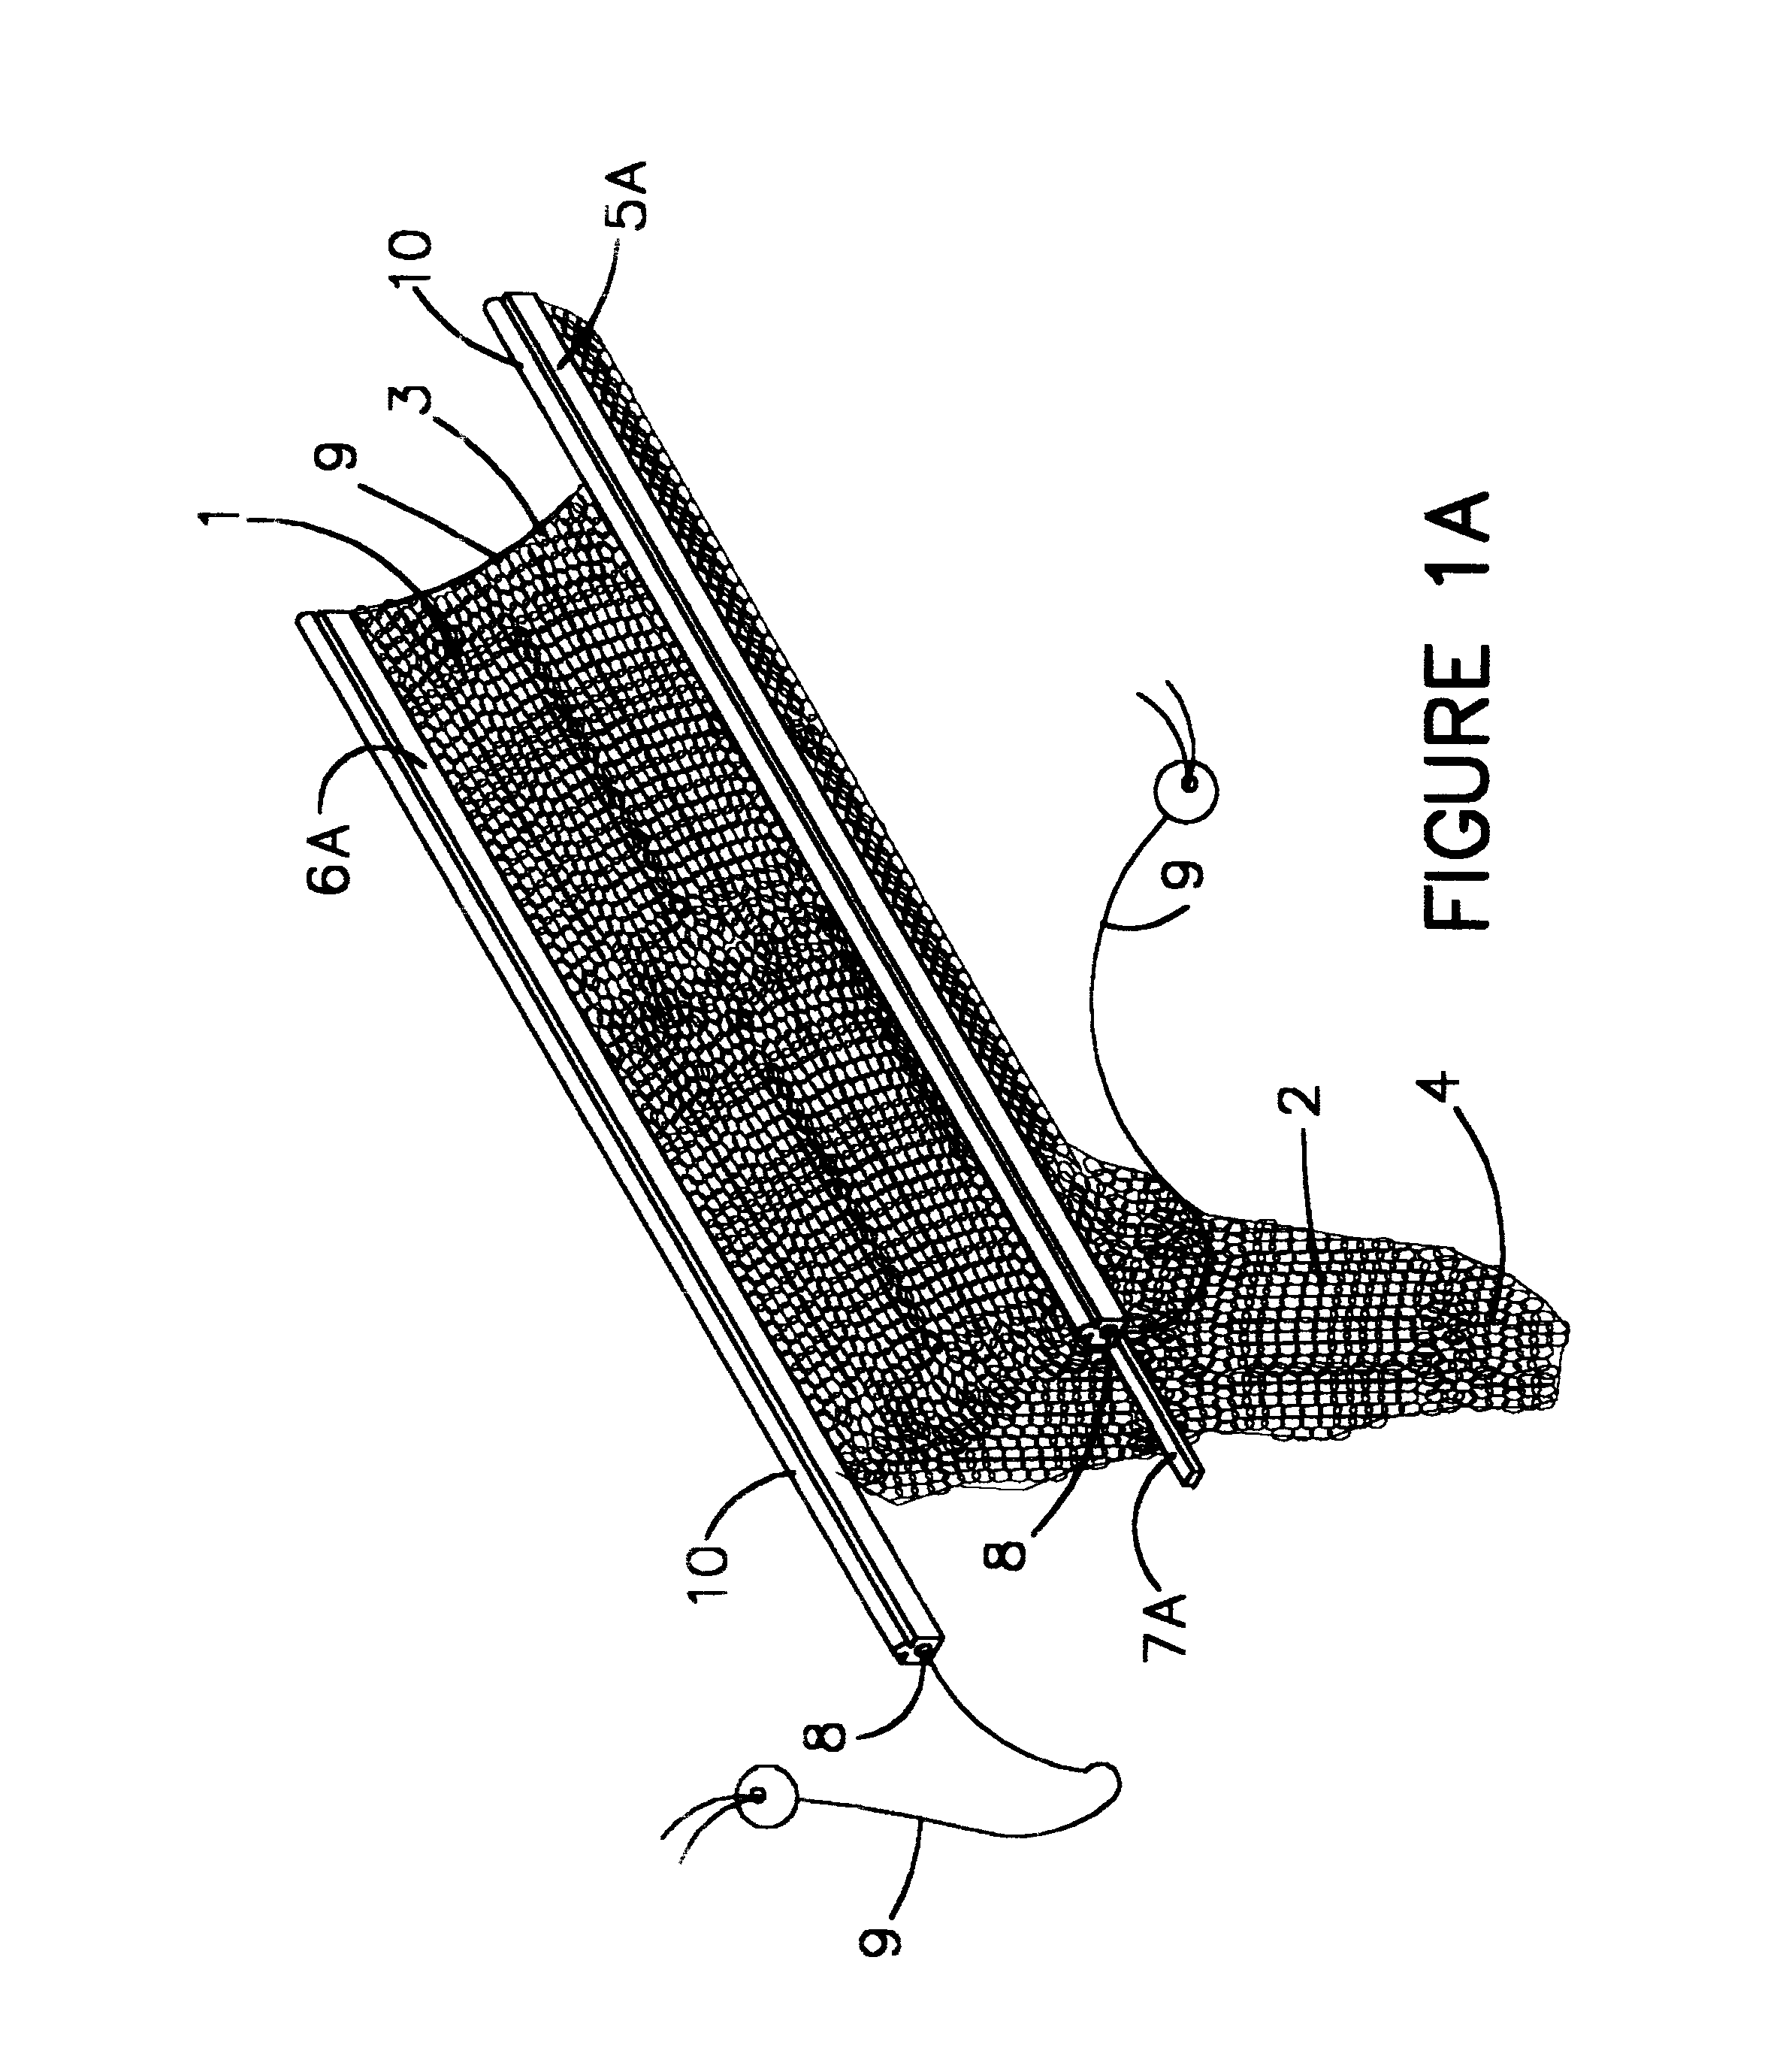 Delivery assistance device